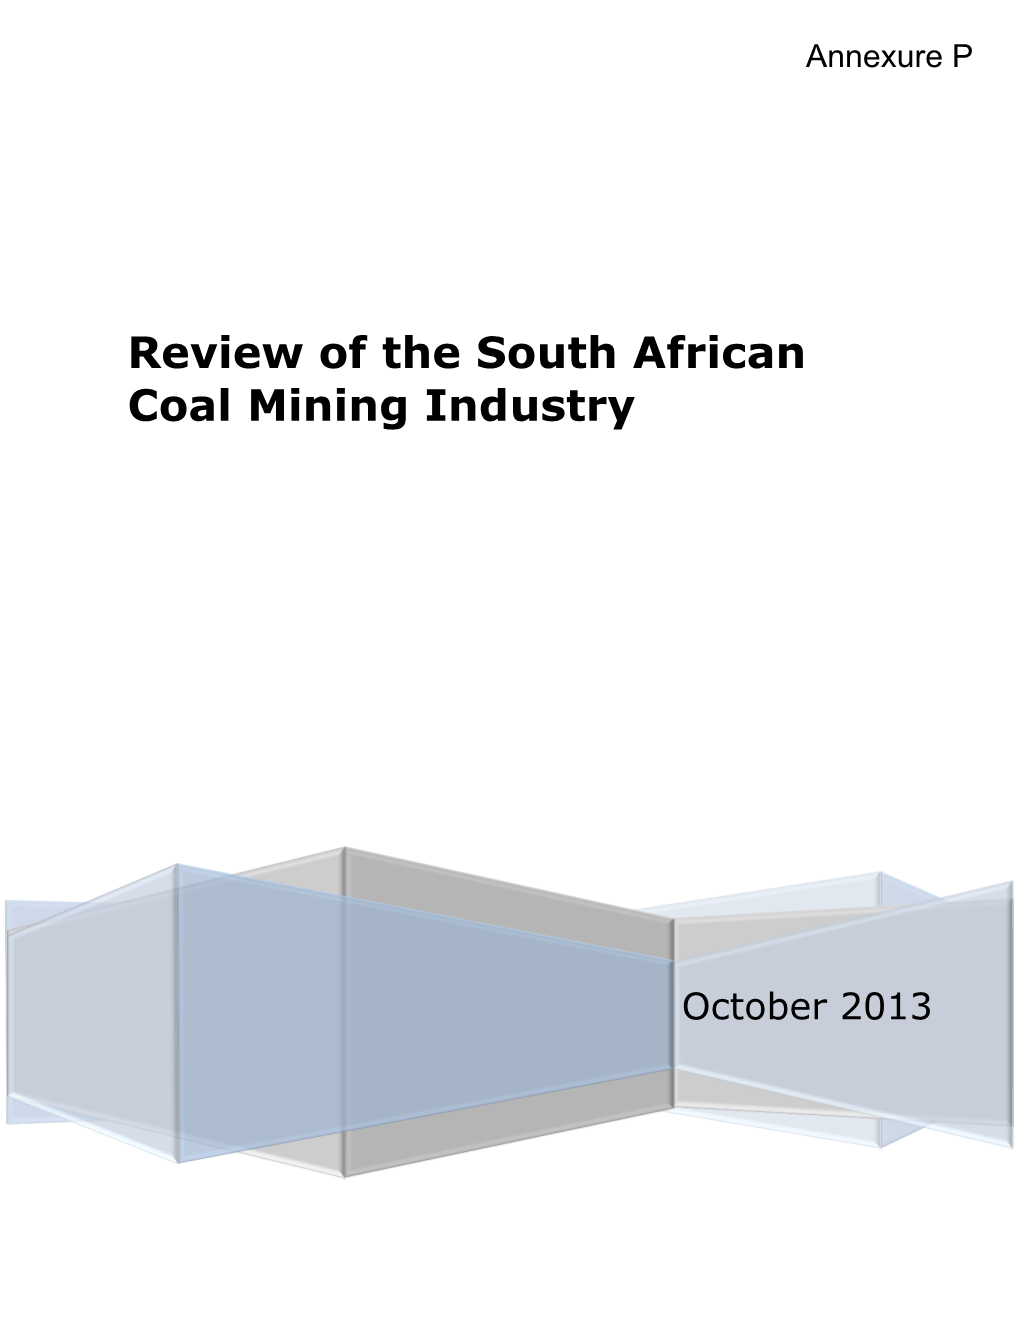 Review of the South African Coal Mining Industry